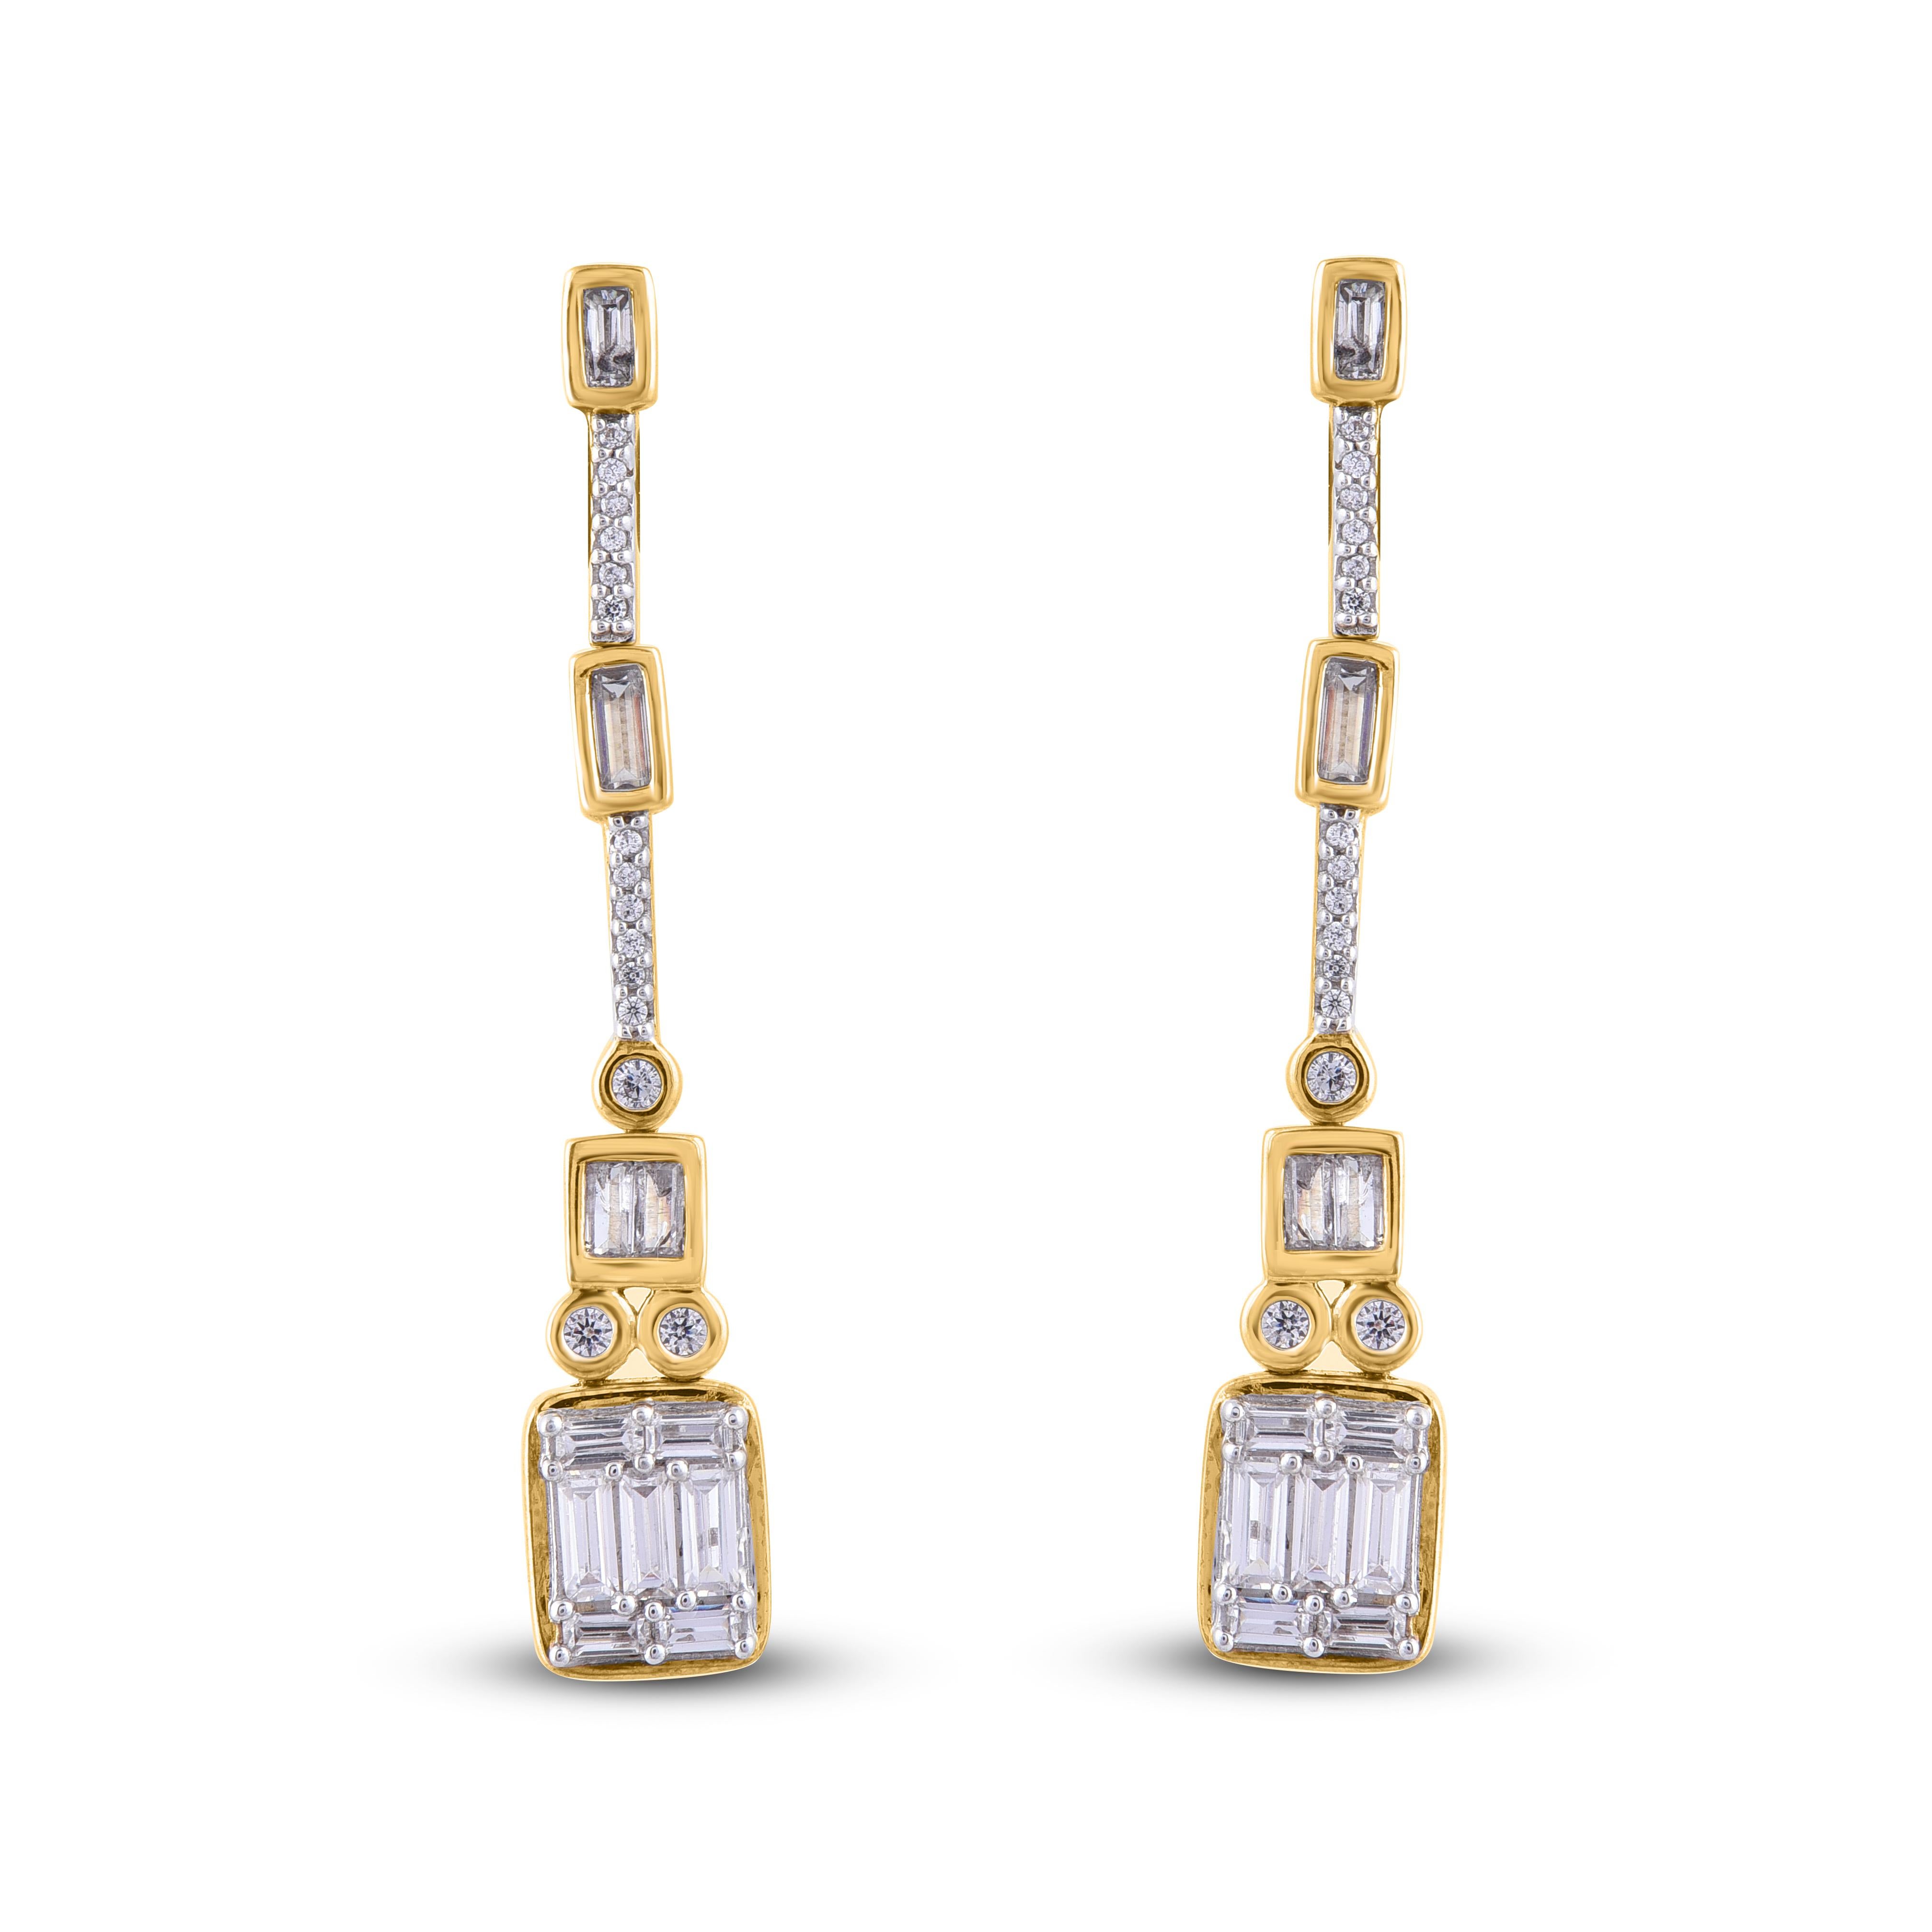 Modern and mesmerizing and an eye catchy look for any occasion. these diamond drop earrings are Embedded with 30 round and 22 baguette cut diamonds set in prong and Bezel setting and dazzles in H-I color I2 clarity. Crafted by our inhouse experts in